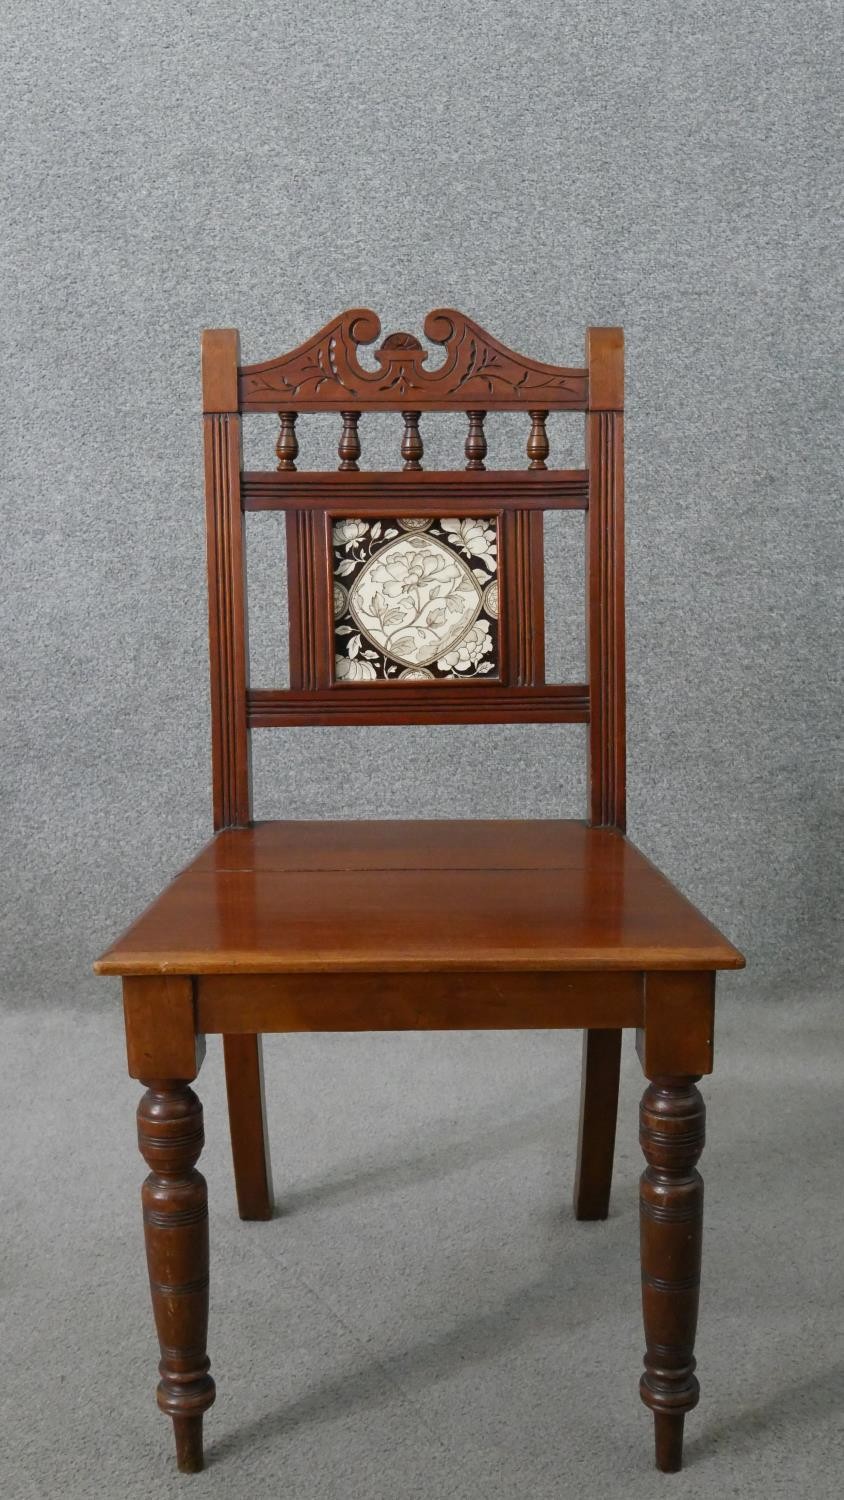 A pair of Victorian walnut Aesthetic movement hall chairs, the back set with a single tile, possibly - Image 2 of 8